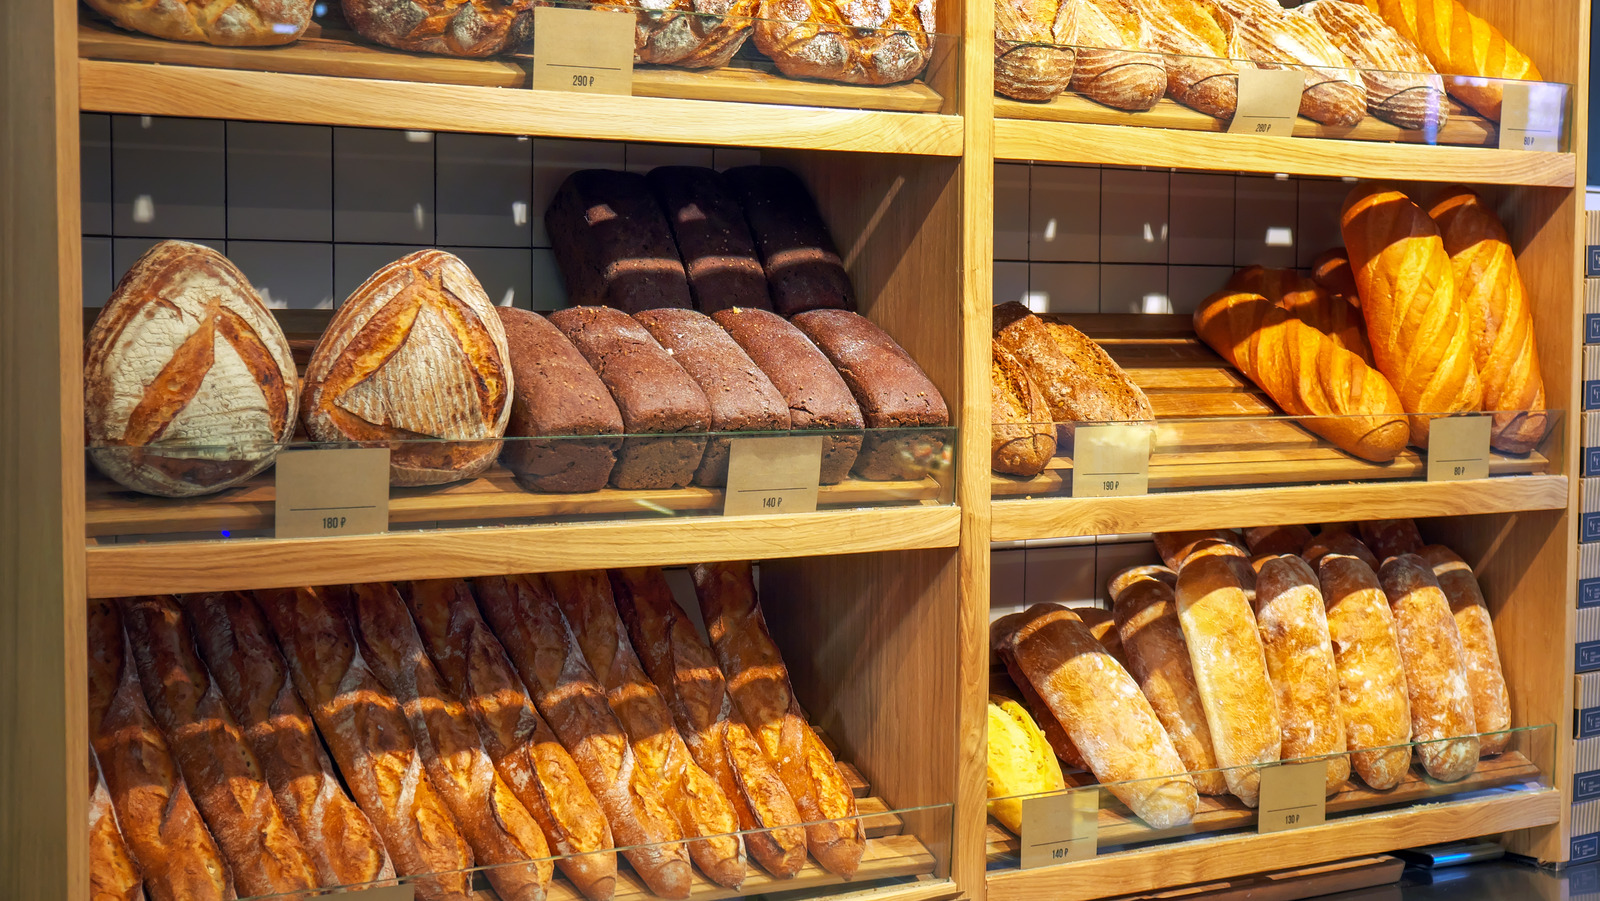 Discounted bakery selections